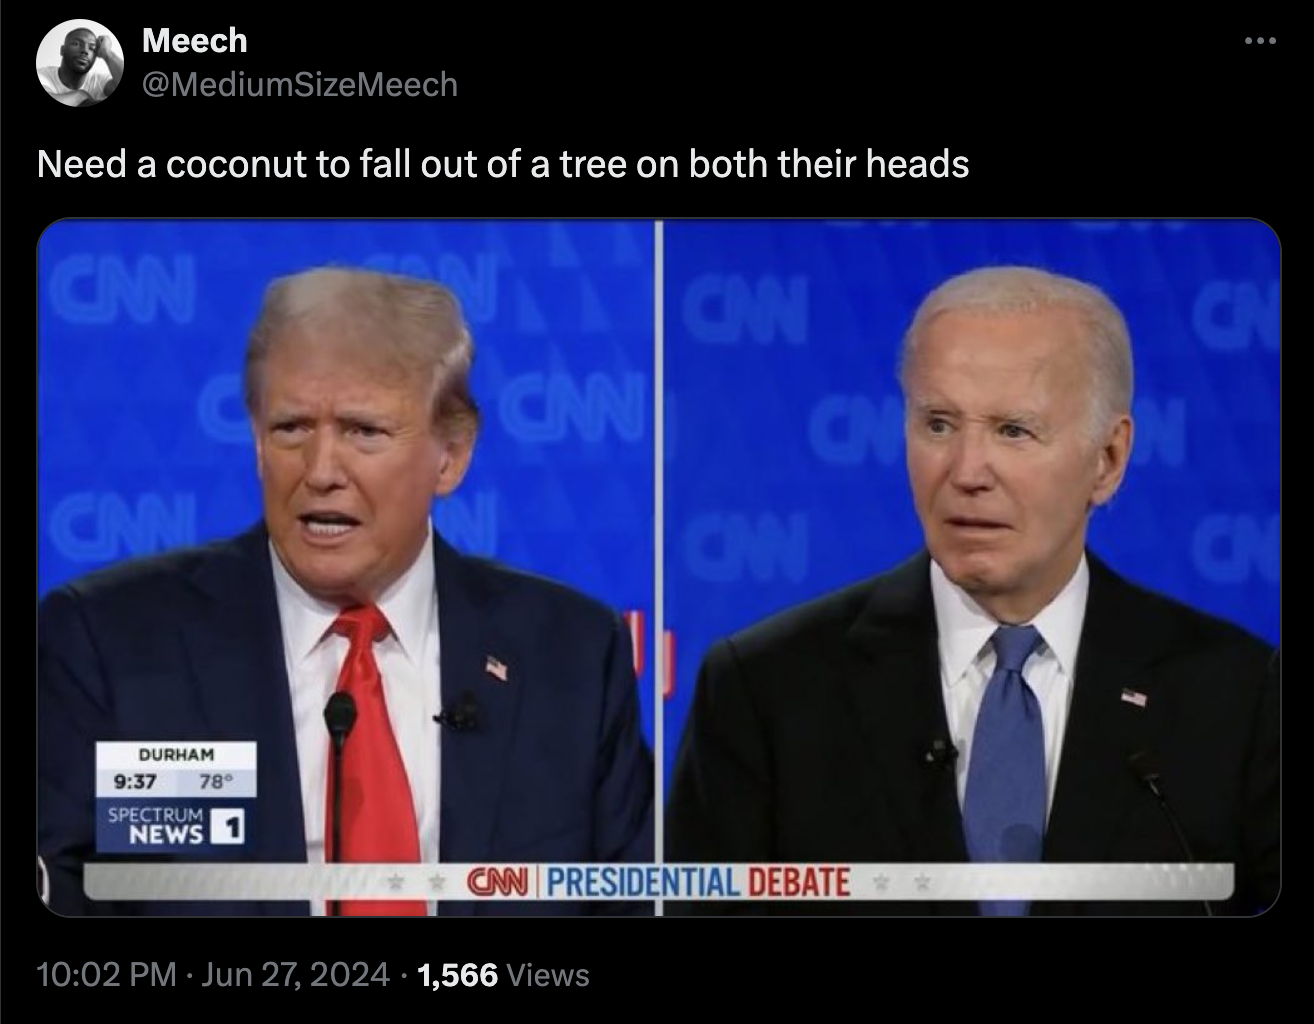 screenshot - Meech SizeMeech Need a coconut to fall out of a tree on both their heads Can Can Cn Can Cn N Can Can Cn Durham Spectrum News 78 Can Presidential Debate 1,566 Views